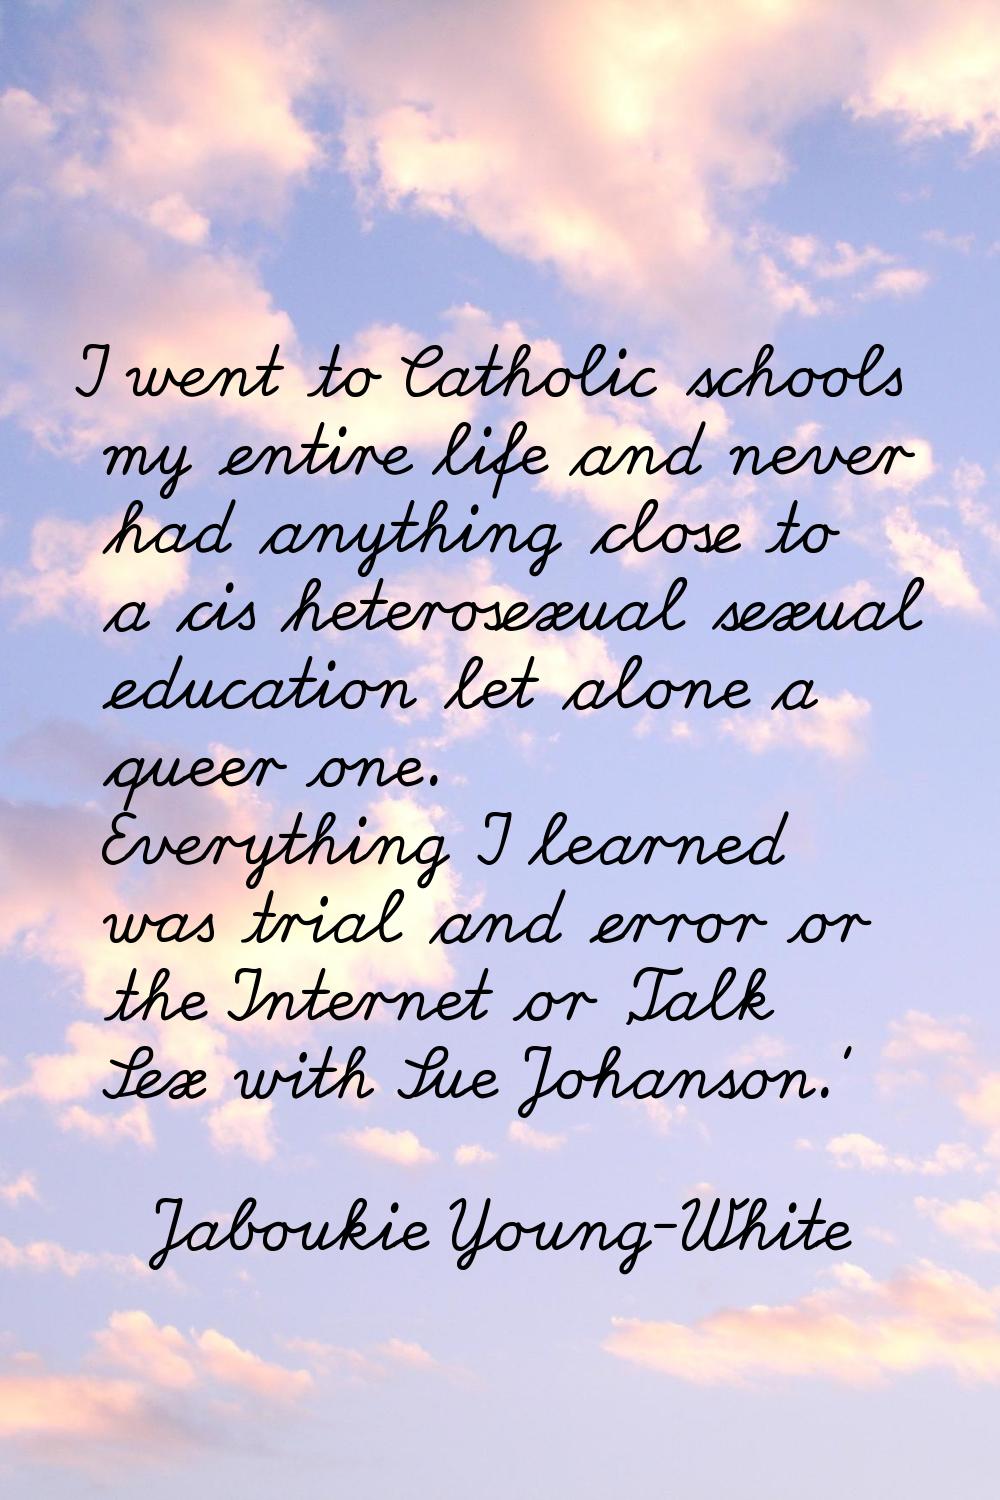 I went to Catholic schools my entire life and never had anything close to a cis heterosexual sexual